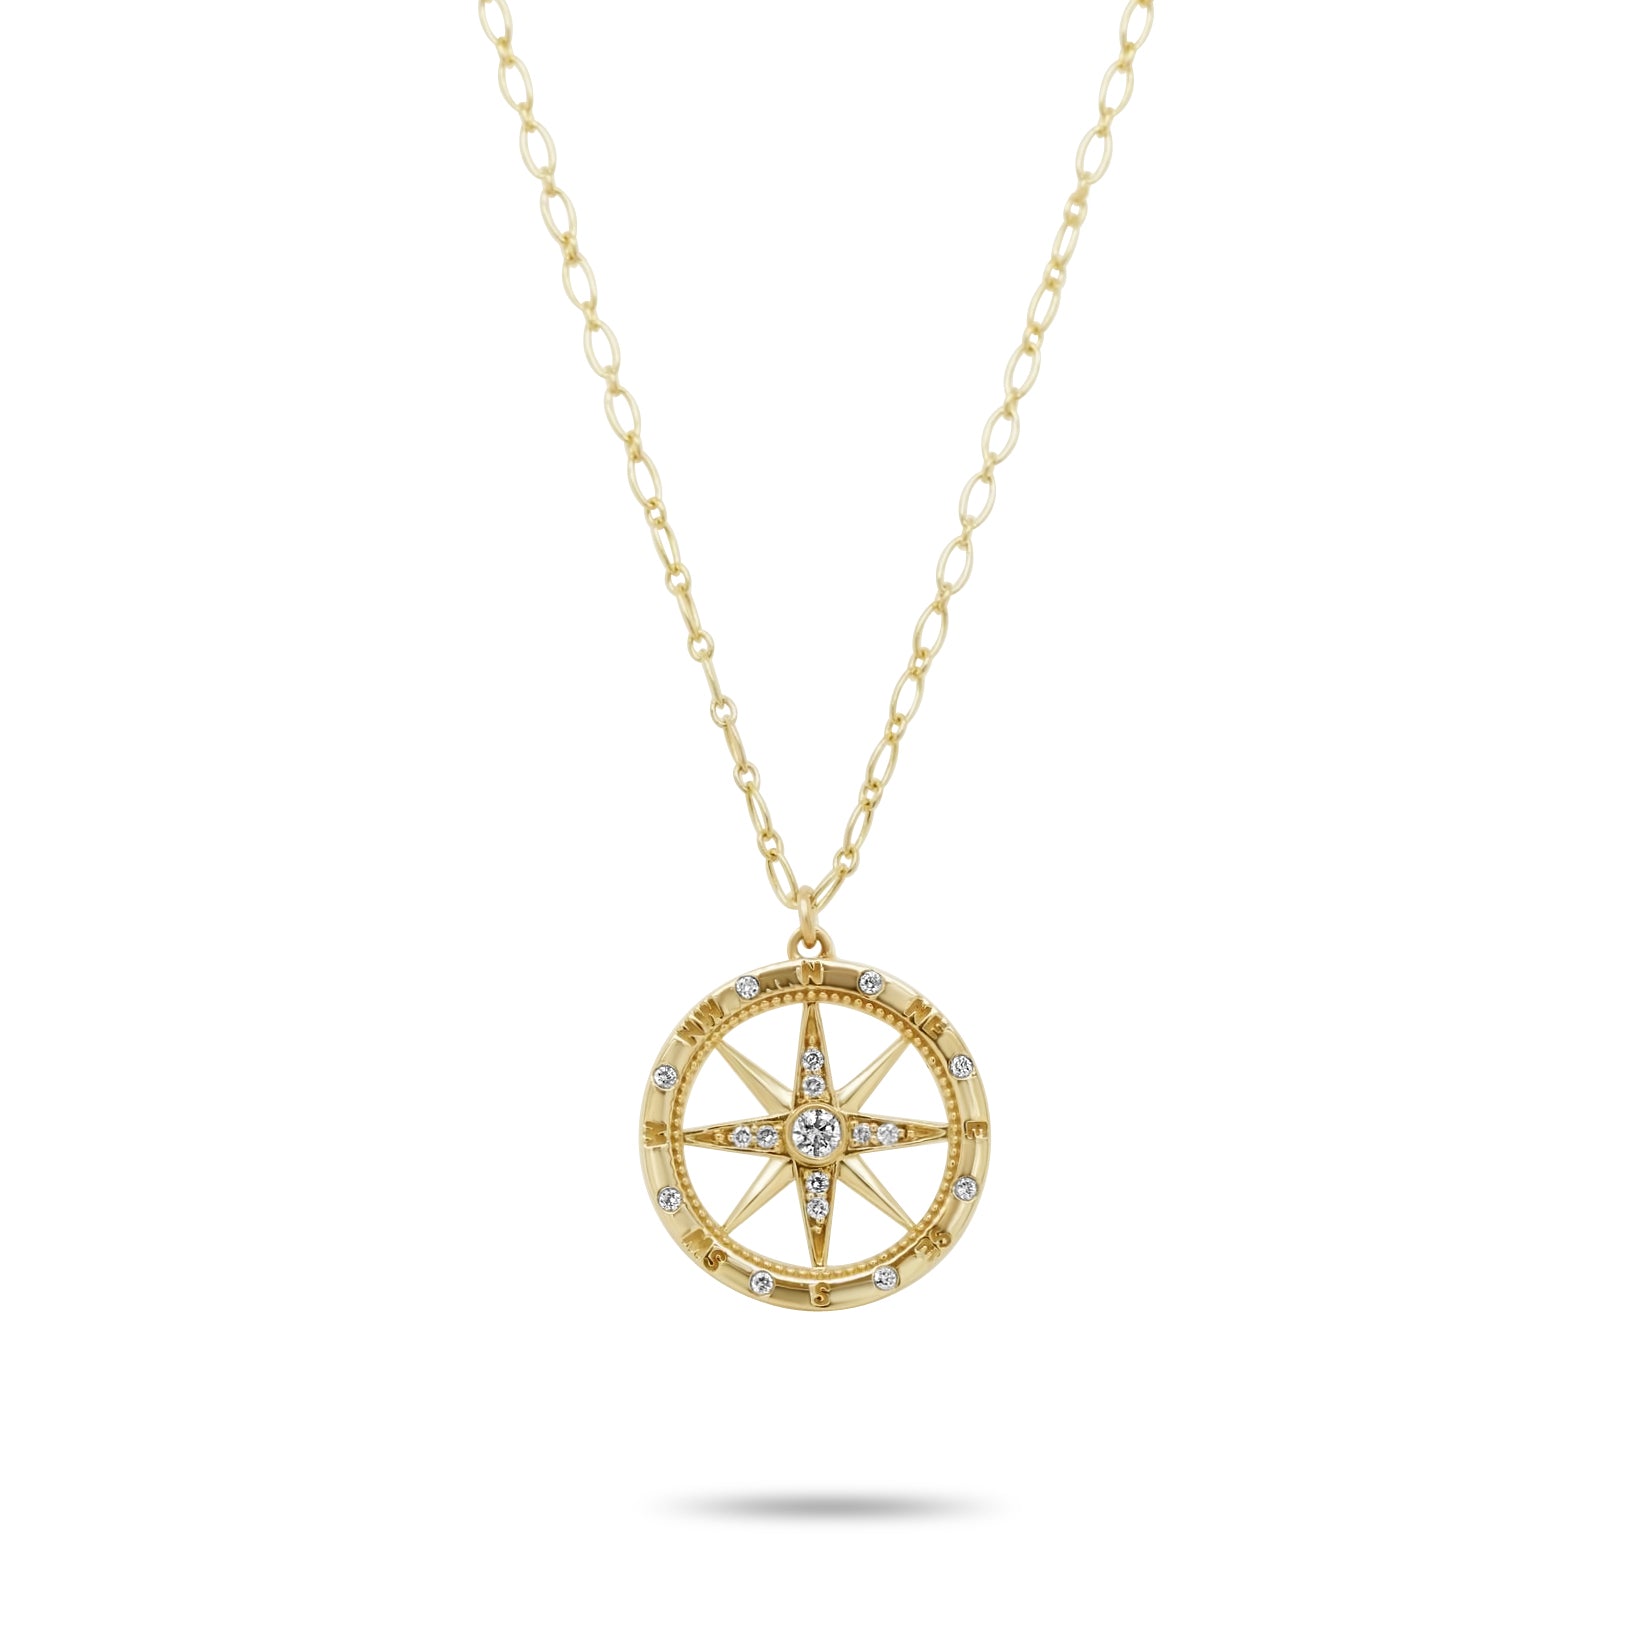 14k yellow gold diamond compass pendant necklace on flat link chain